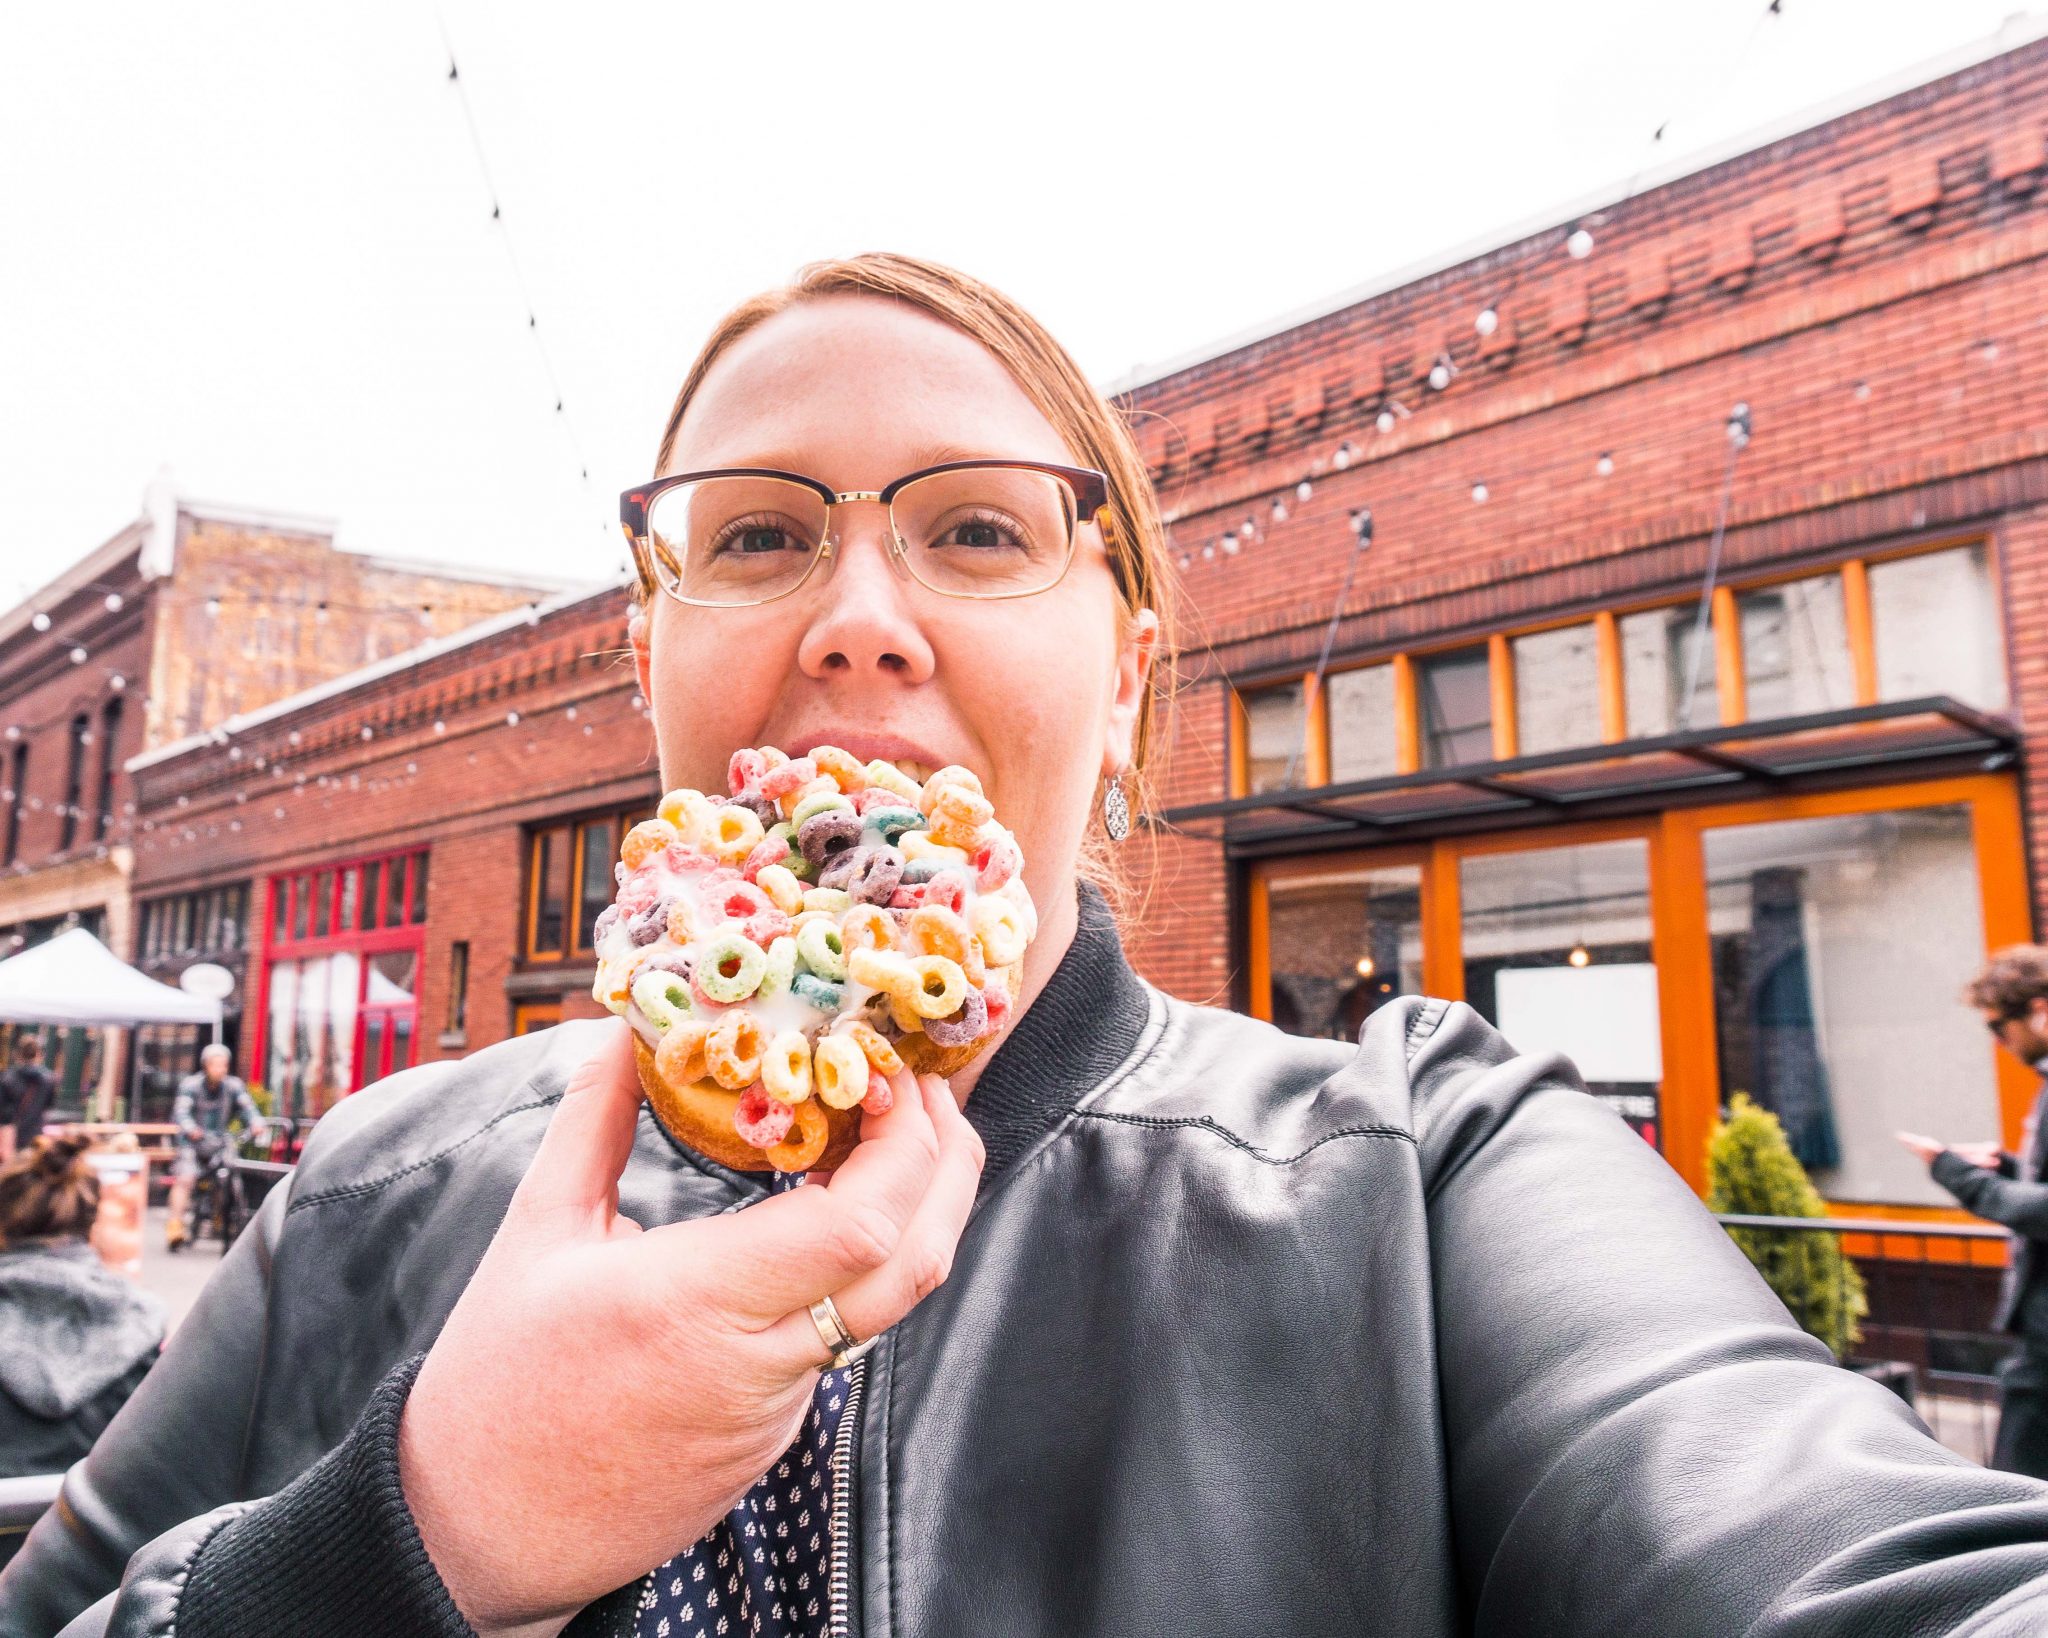 Eating a Froot Loop-covered doughnut from Voodoo Doughnuts in Portland, Oregon